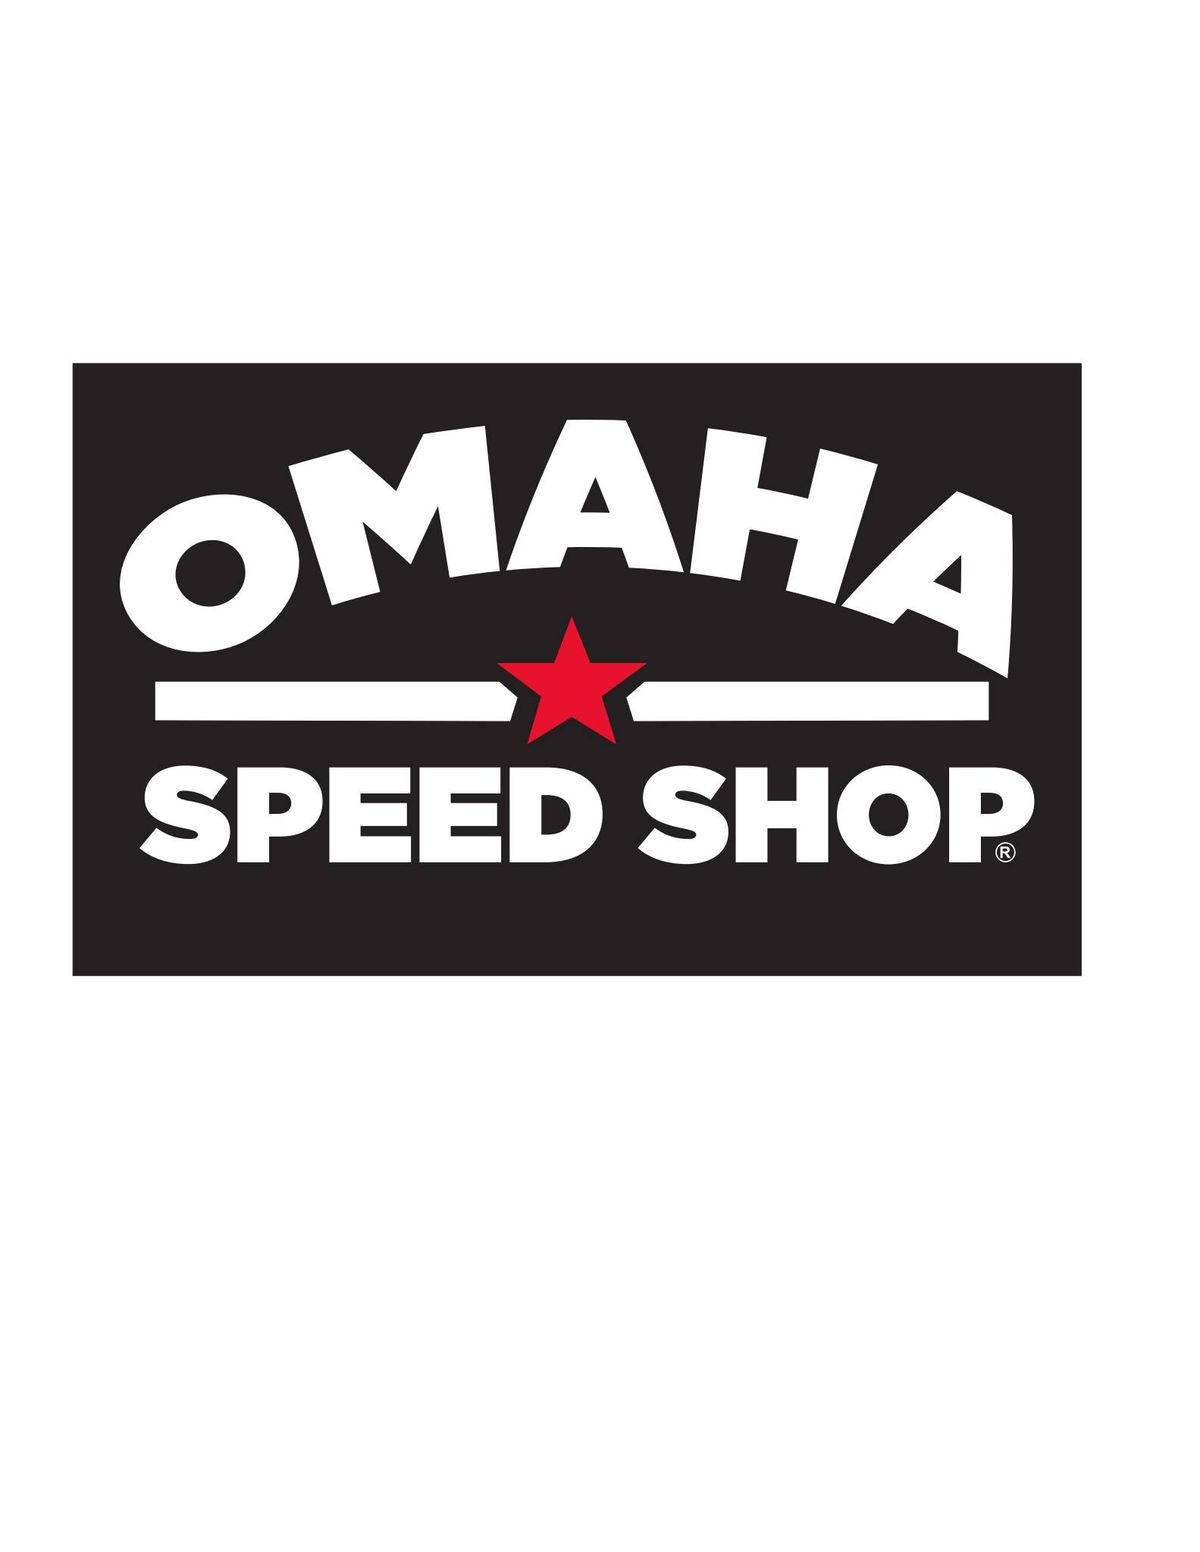 Reminder - DONUTS & COFFEE + Car Show - 7a-10a Saturday June 15 at the Speed Shop